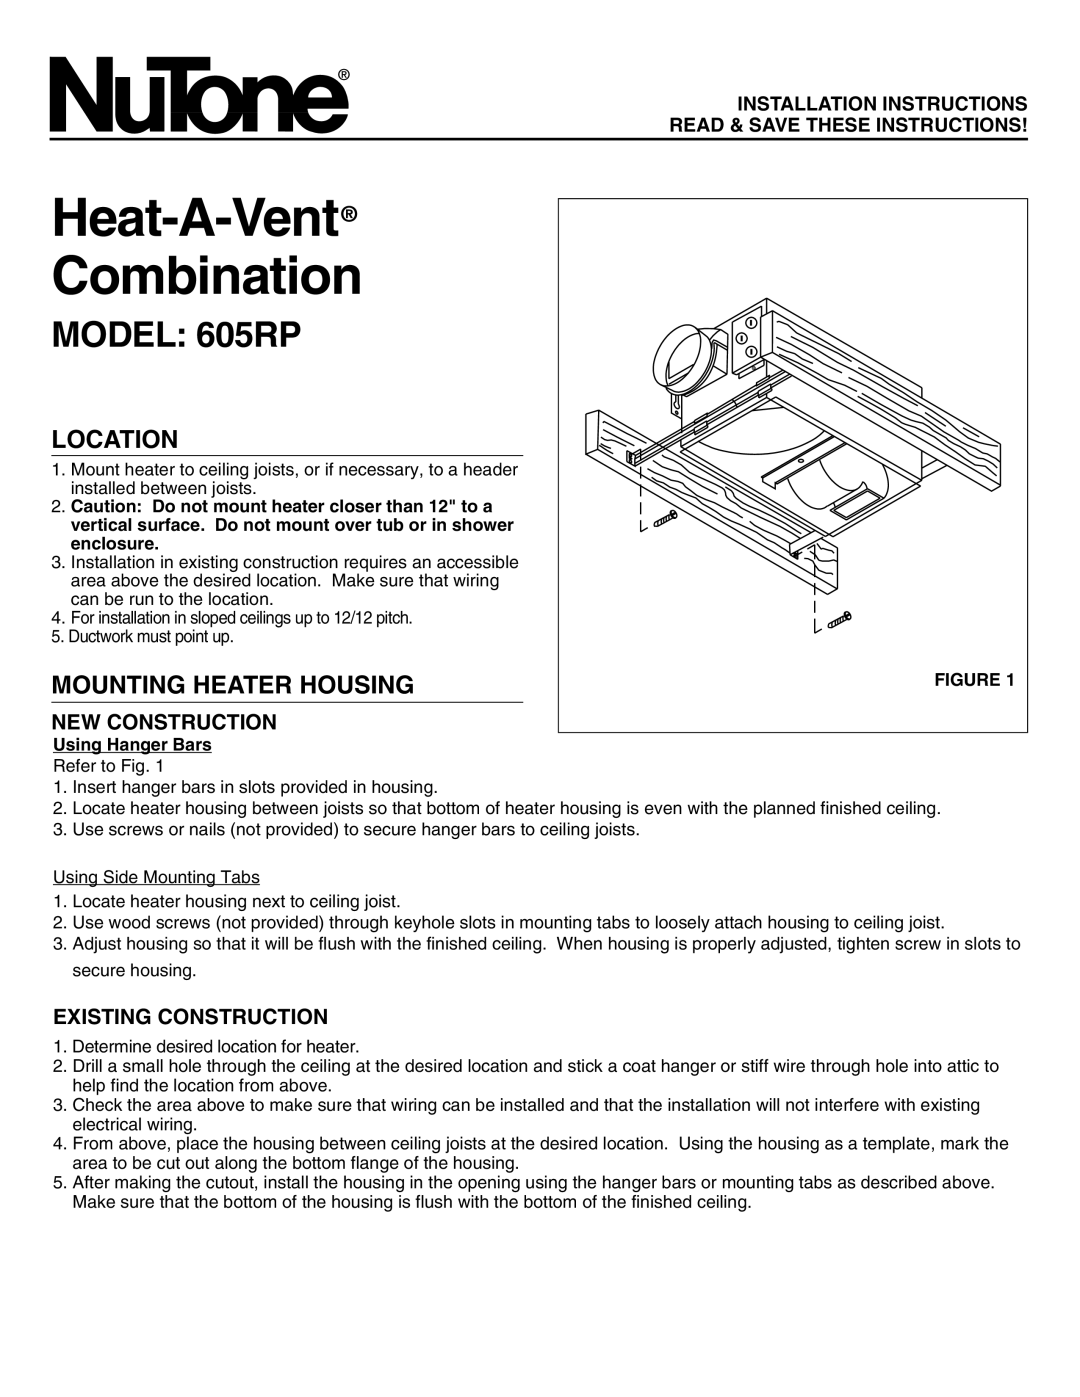 NuTone installation instructions Heat-A-Vent Combination, MODEL 605RP, Location, Mounting Heater Housing 